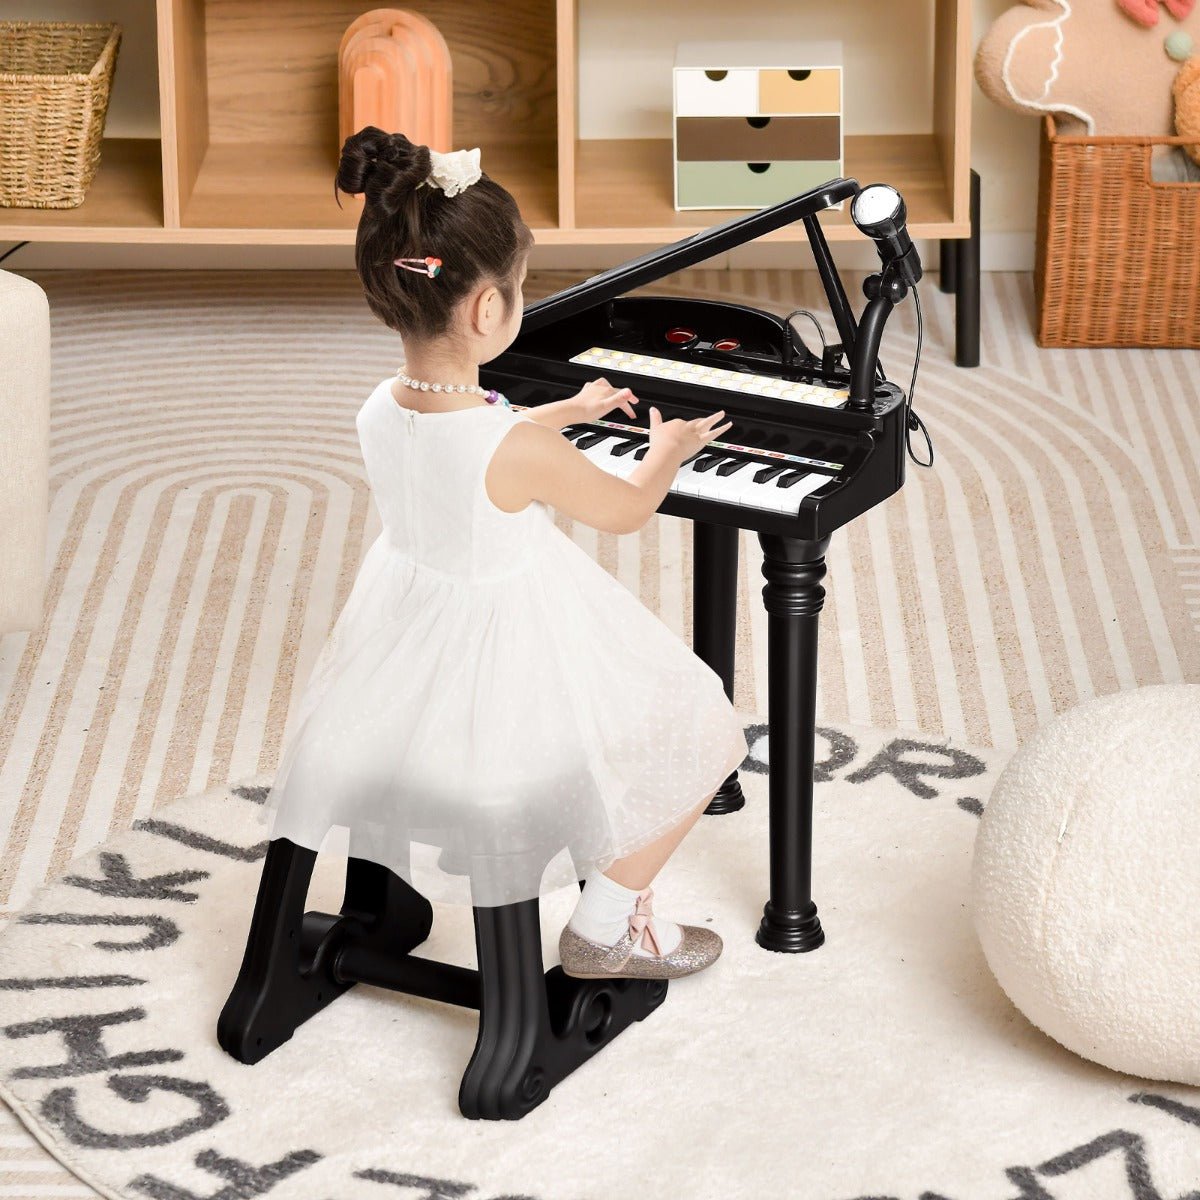 Buy the Kids Black Piano Keyboard with Stool and Microphone at Kids Mega Mart